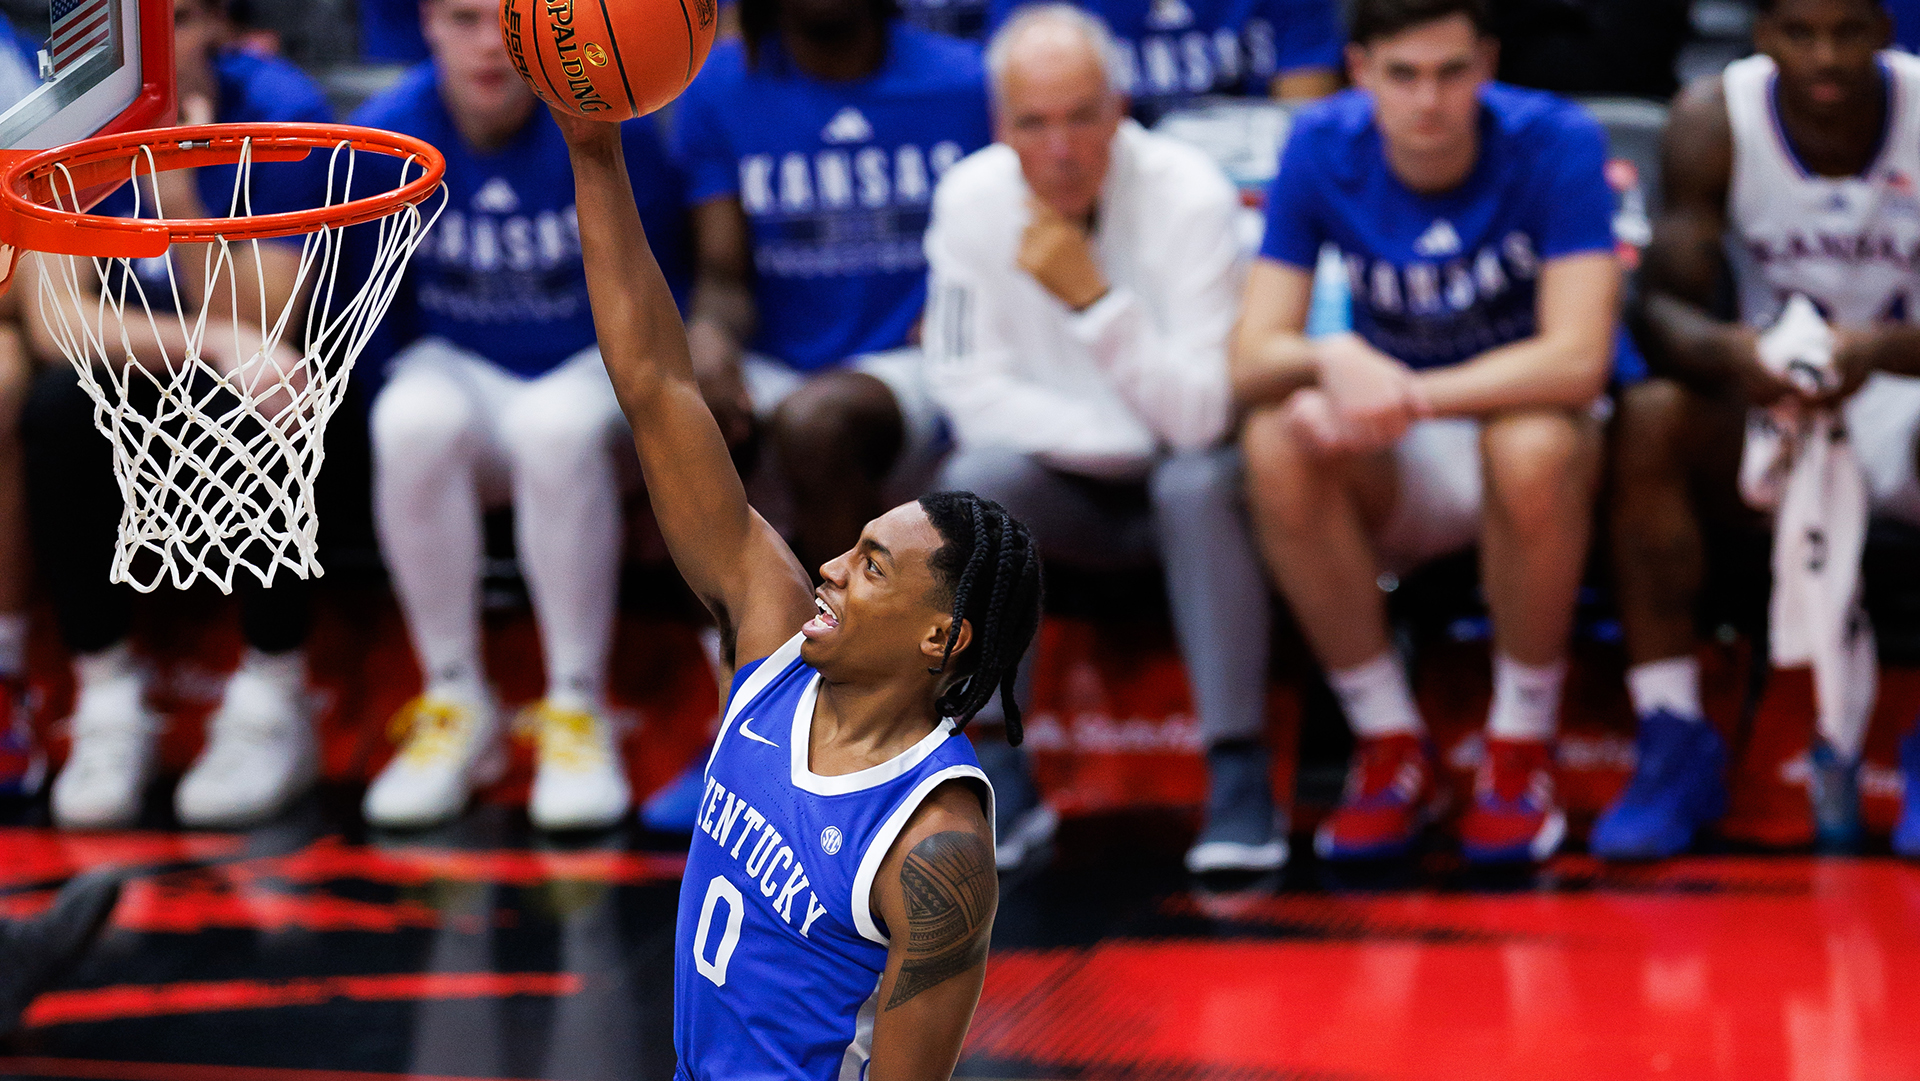 Cats Fight, Come Up Short Against No. 1 Jayhawks